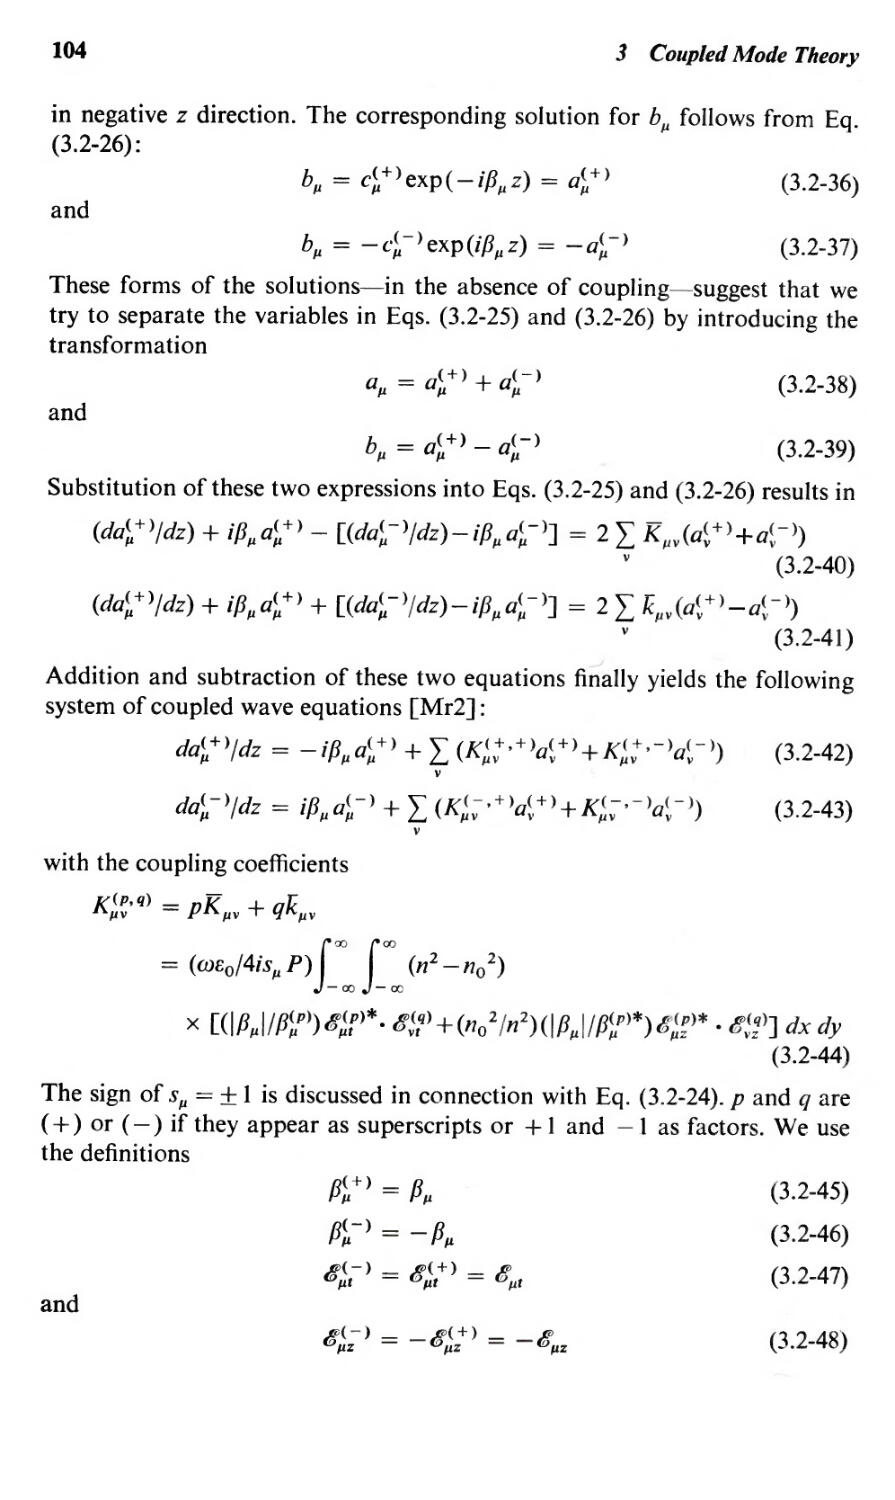 Coupled amplitude equations, 104
Coupled wave equations, 104
--- ideal modes, 104